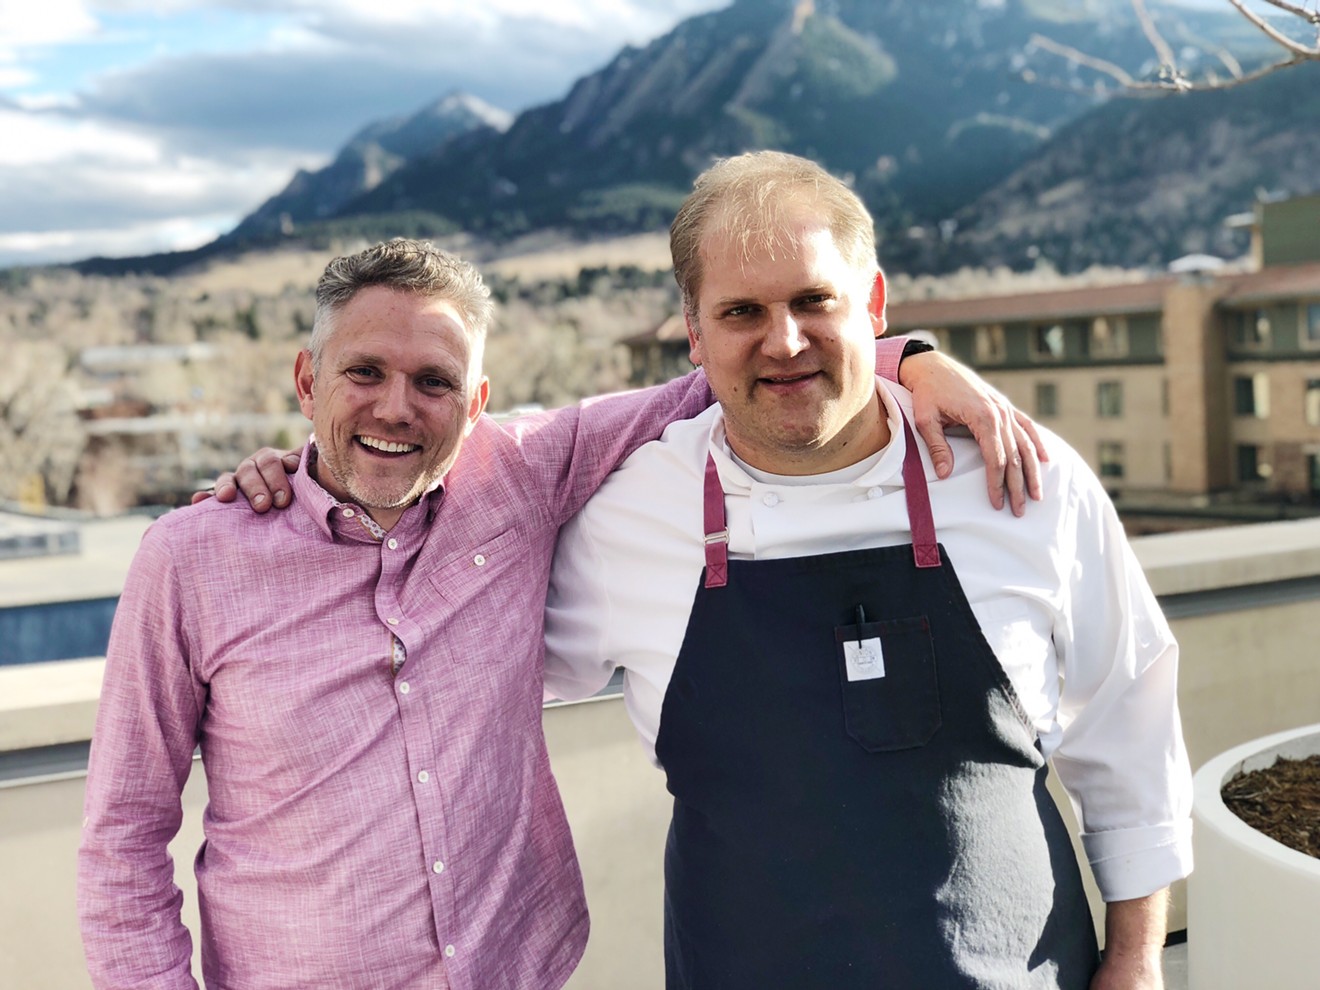 Bryan Dayton and Amos Watts are now welcoming guests to enjoy the great Boulder views at Corrida.